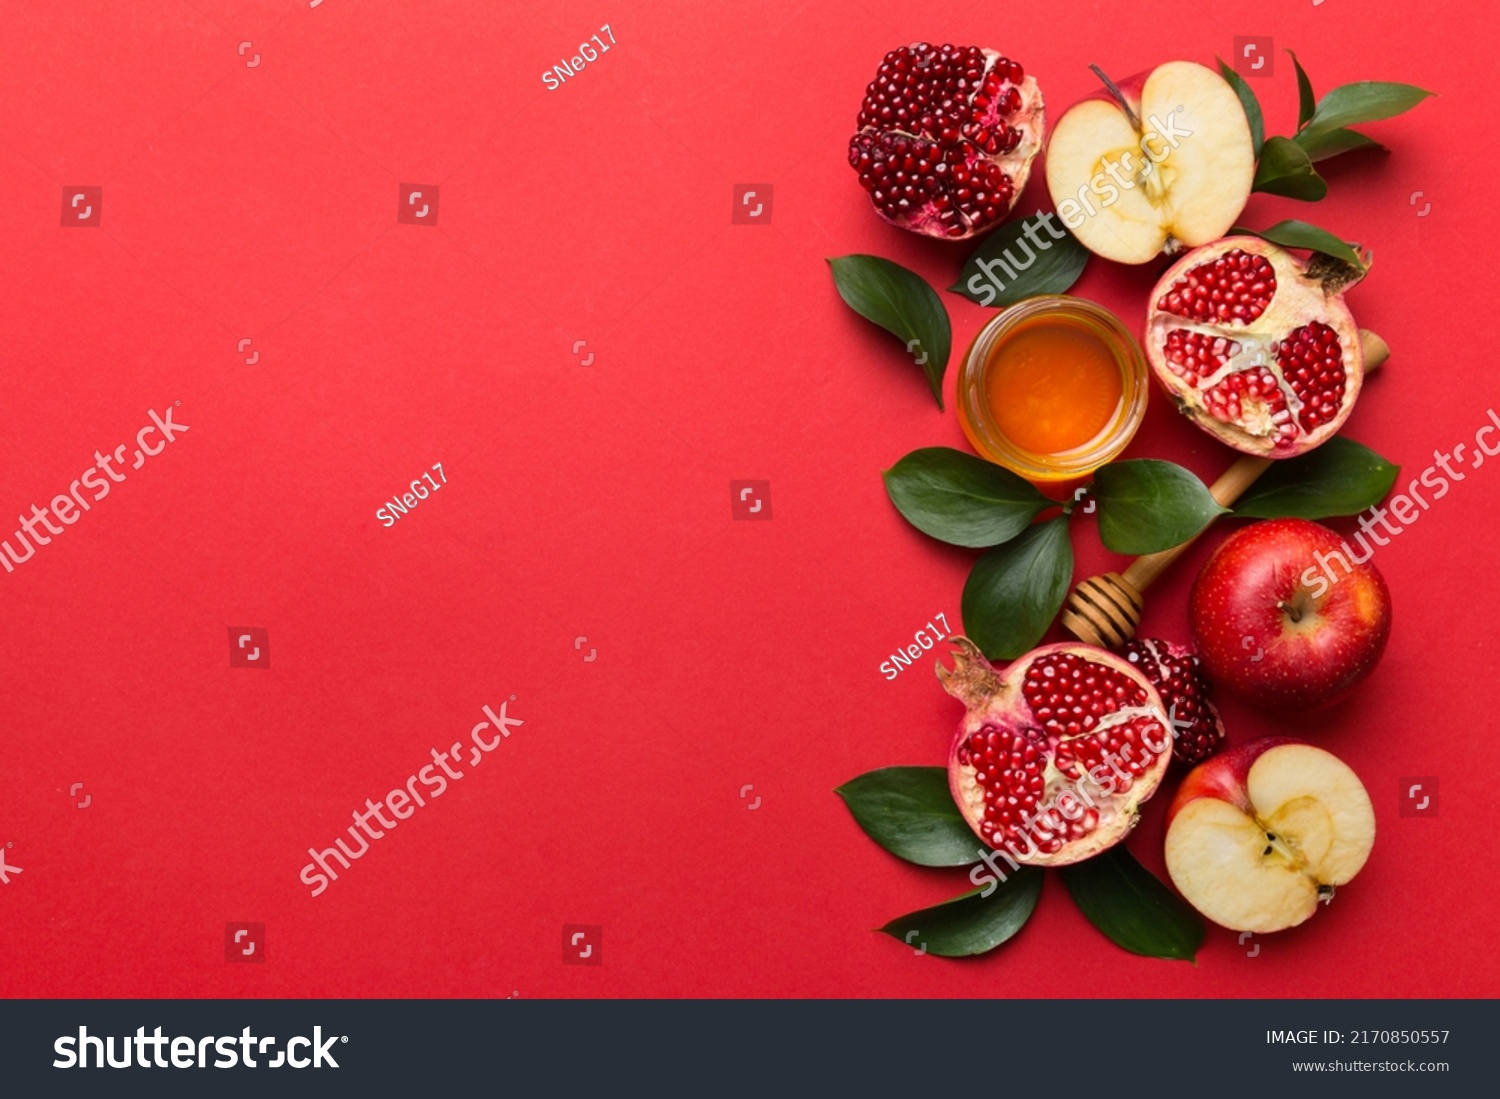 Flat lay composition with symbols jewish Rosh Hashanah holiday attributes on colored background, Rosh hashanah concept. New Year holiday Traditional. Top view with copy space. #2170850557